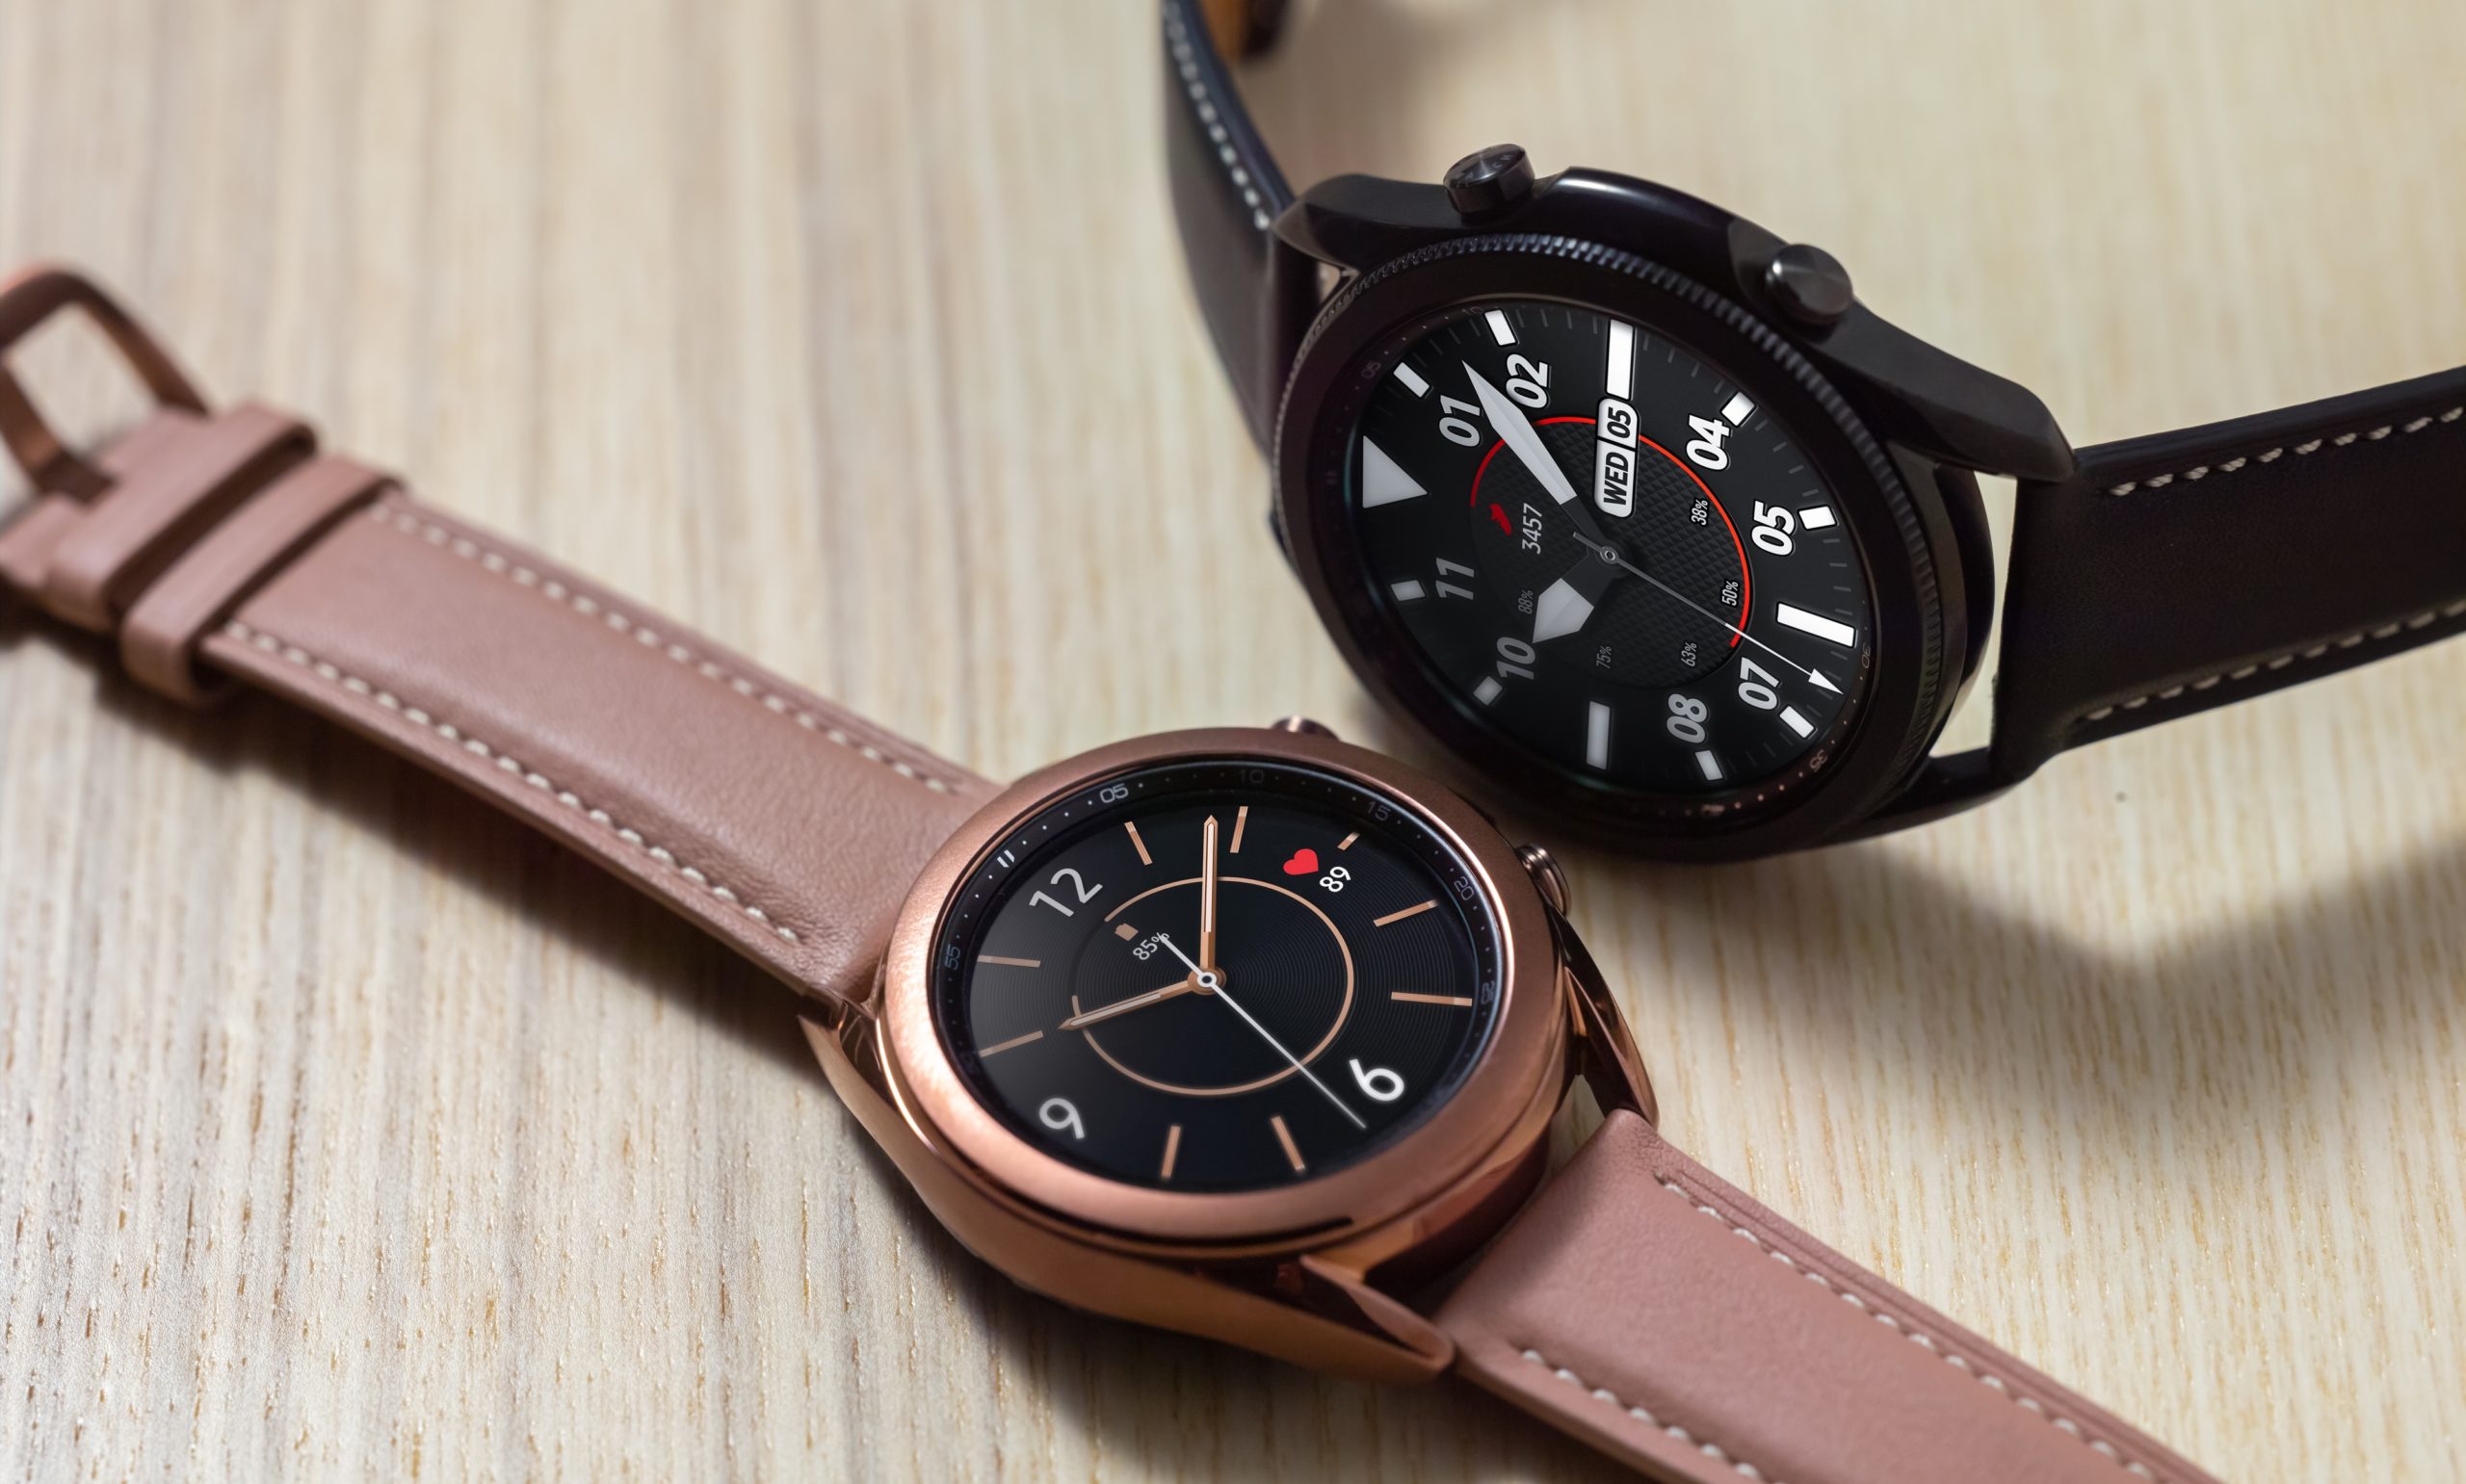 The Samsung Galaxy Watch 4 looks hot in official-looking renders